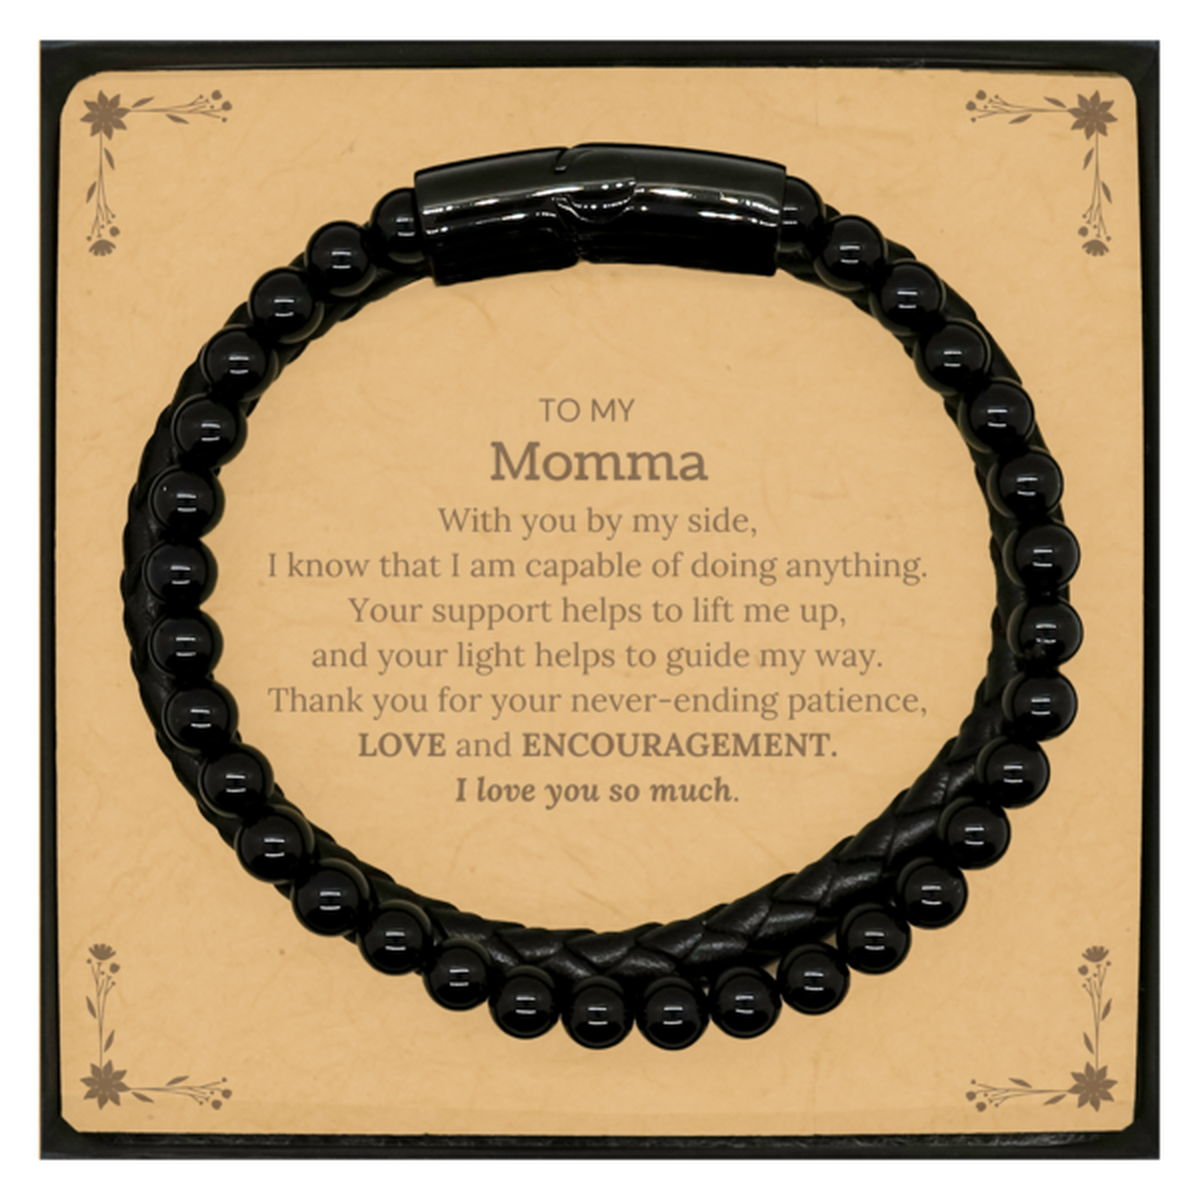 Appreciation Momma Stone Leather Bracelets Gifts, To My Momma Birthday Christmas Wedding Keepsake Gifts for Momma With you by my side, I know that I am capable of doing anything. I love you so much